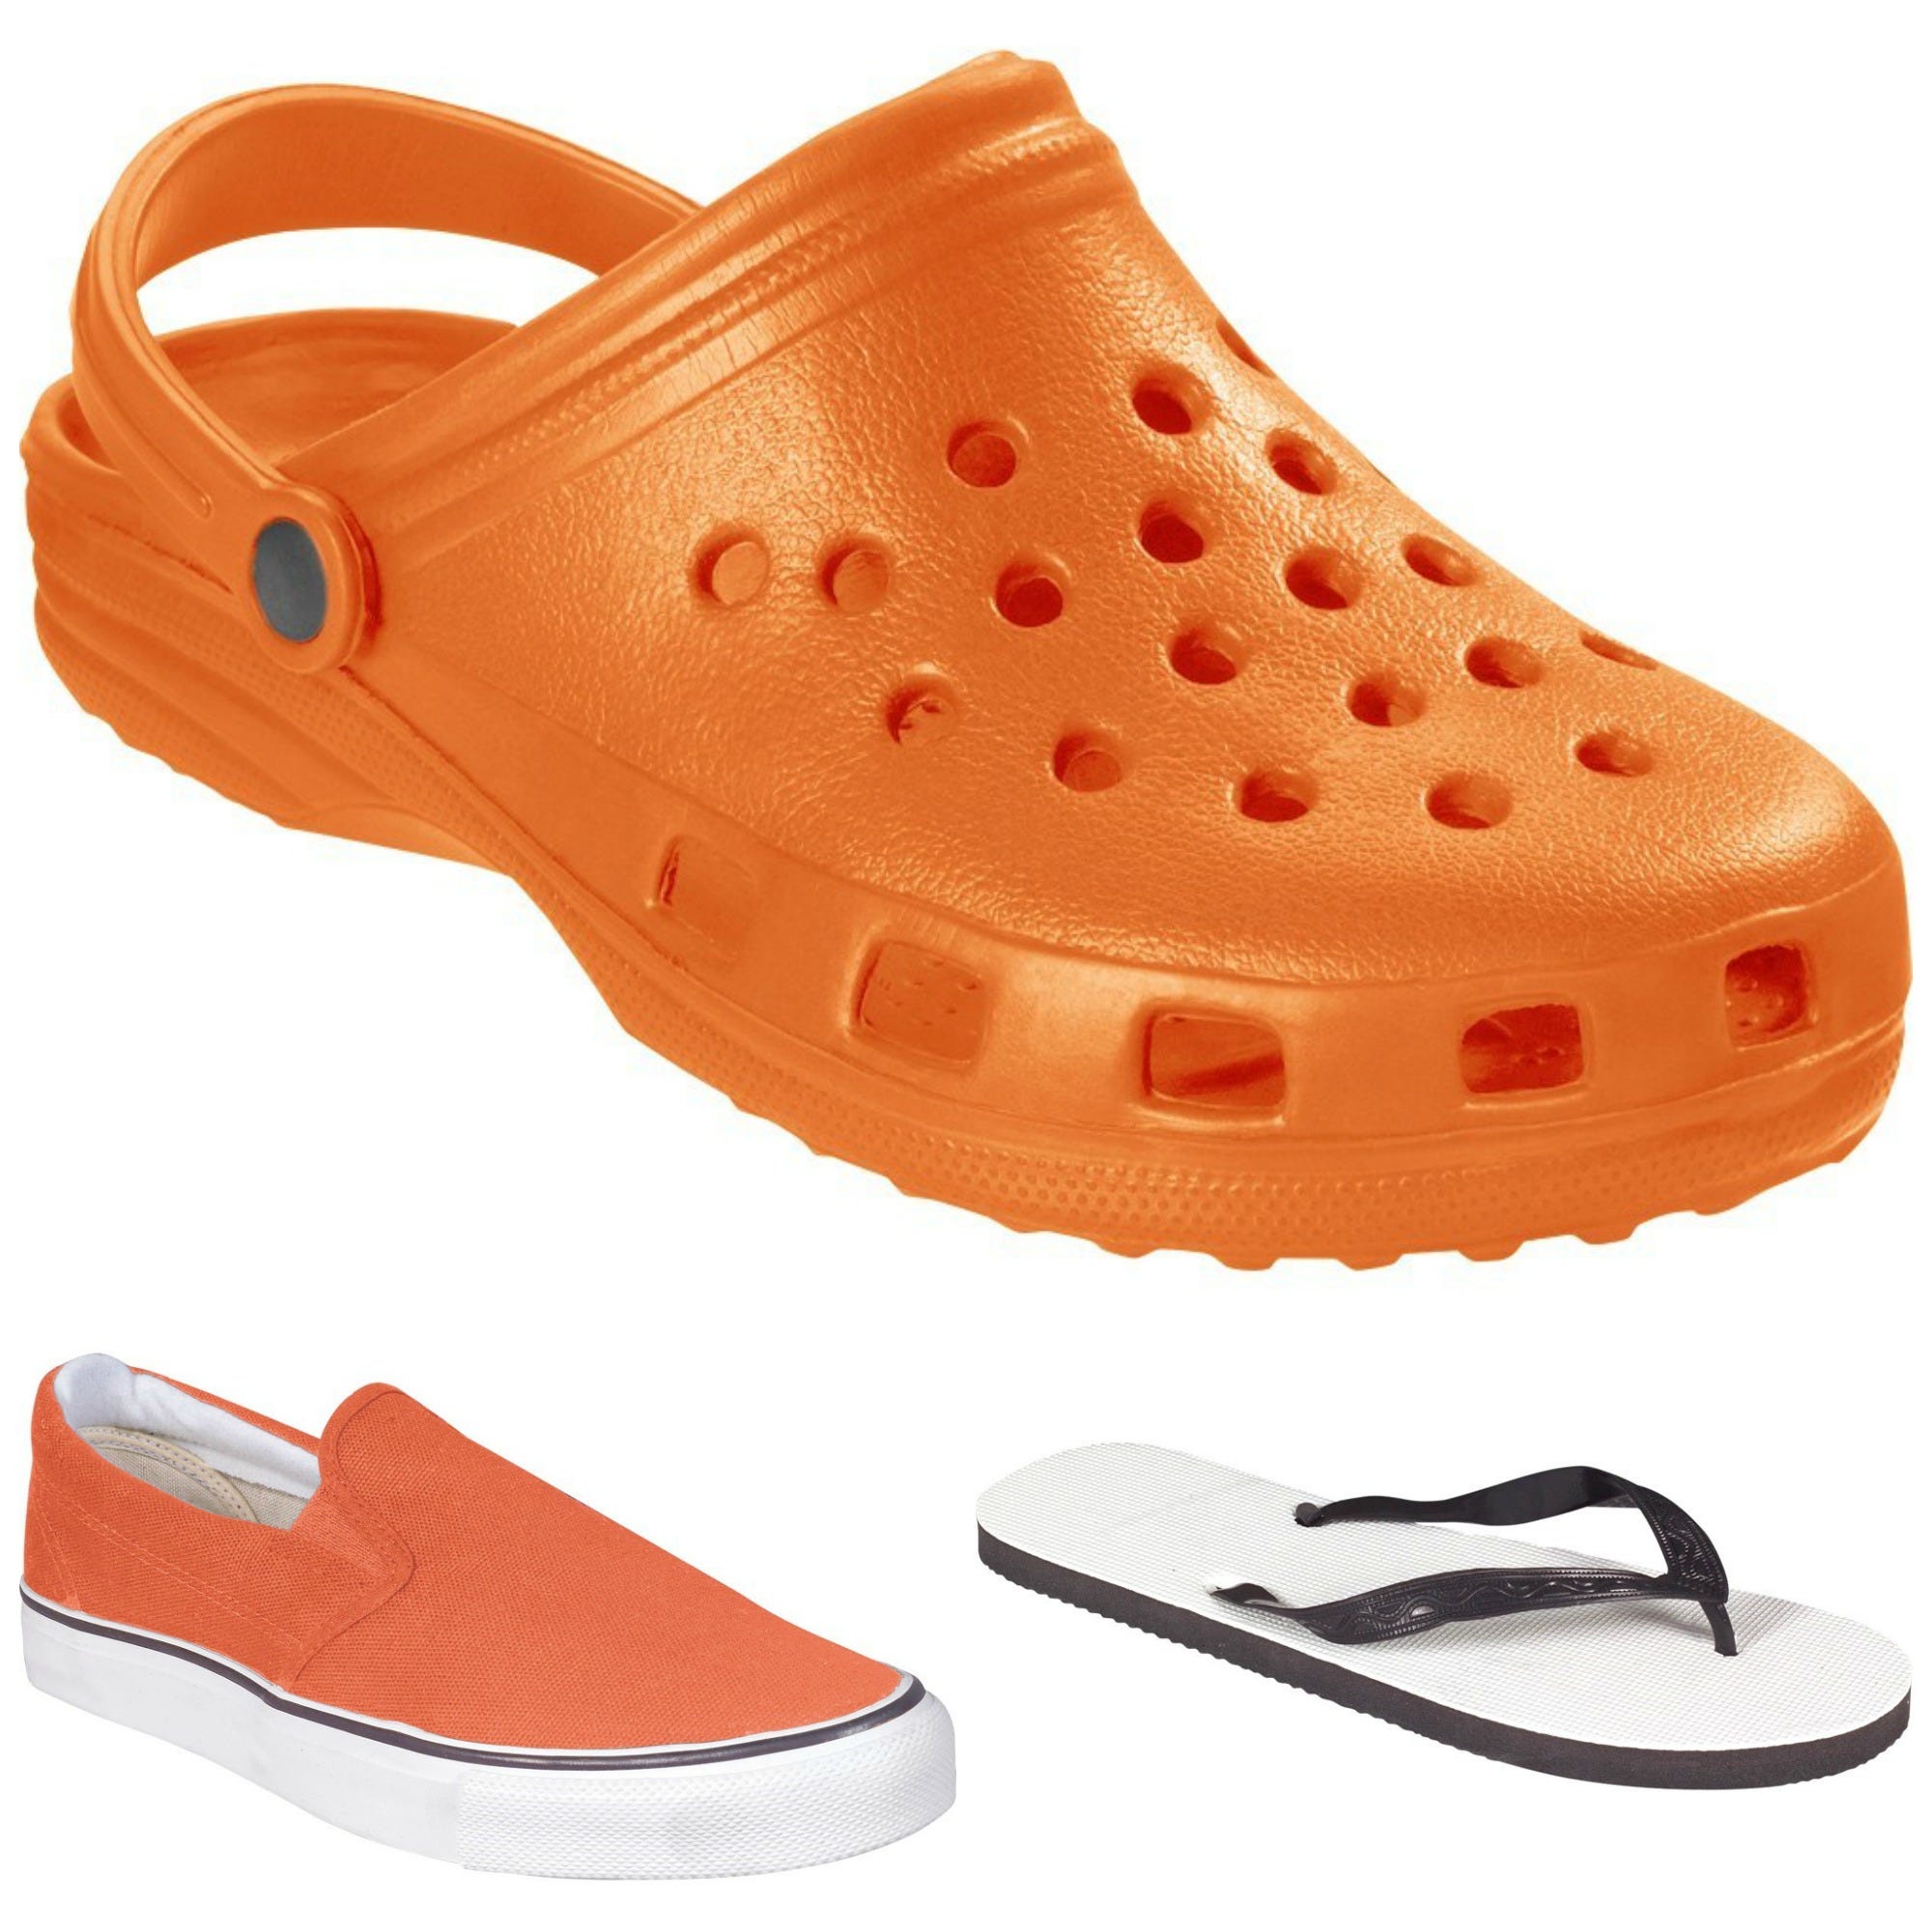 jail shower shoes